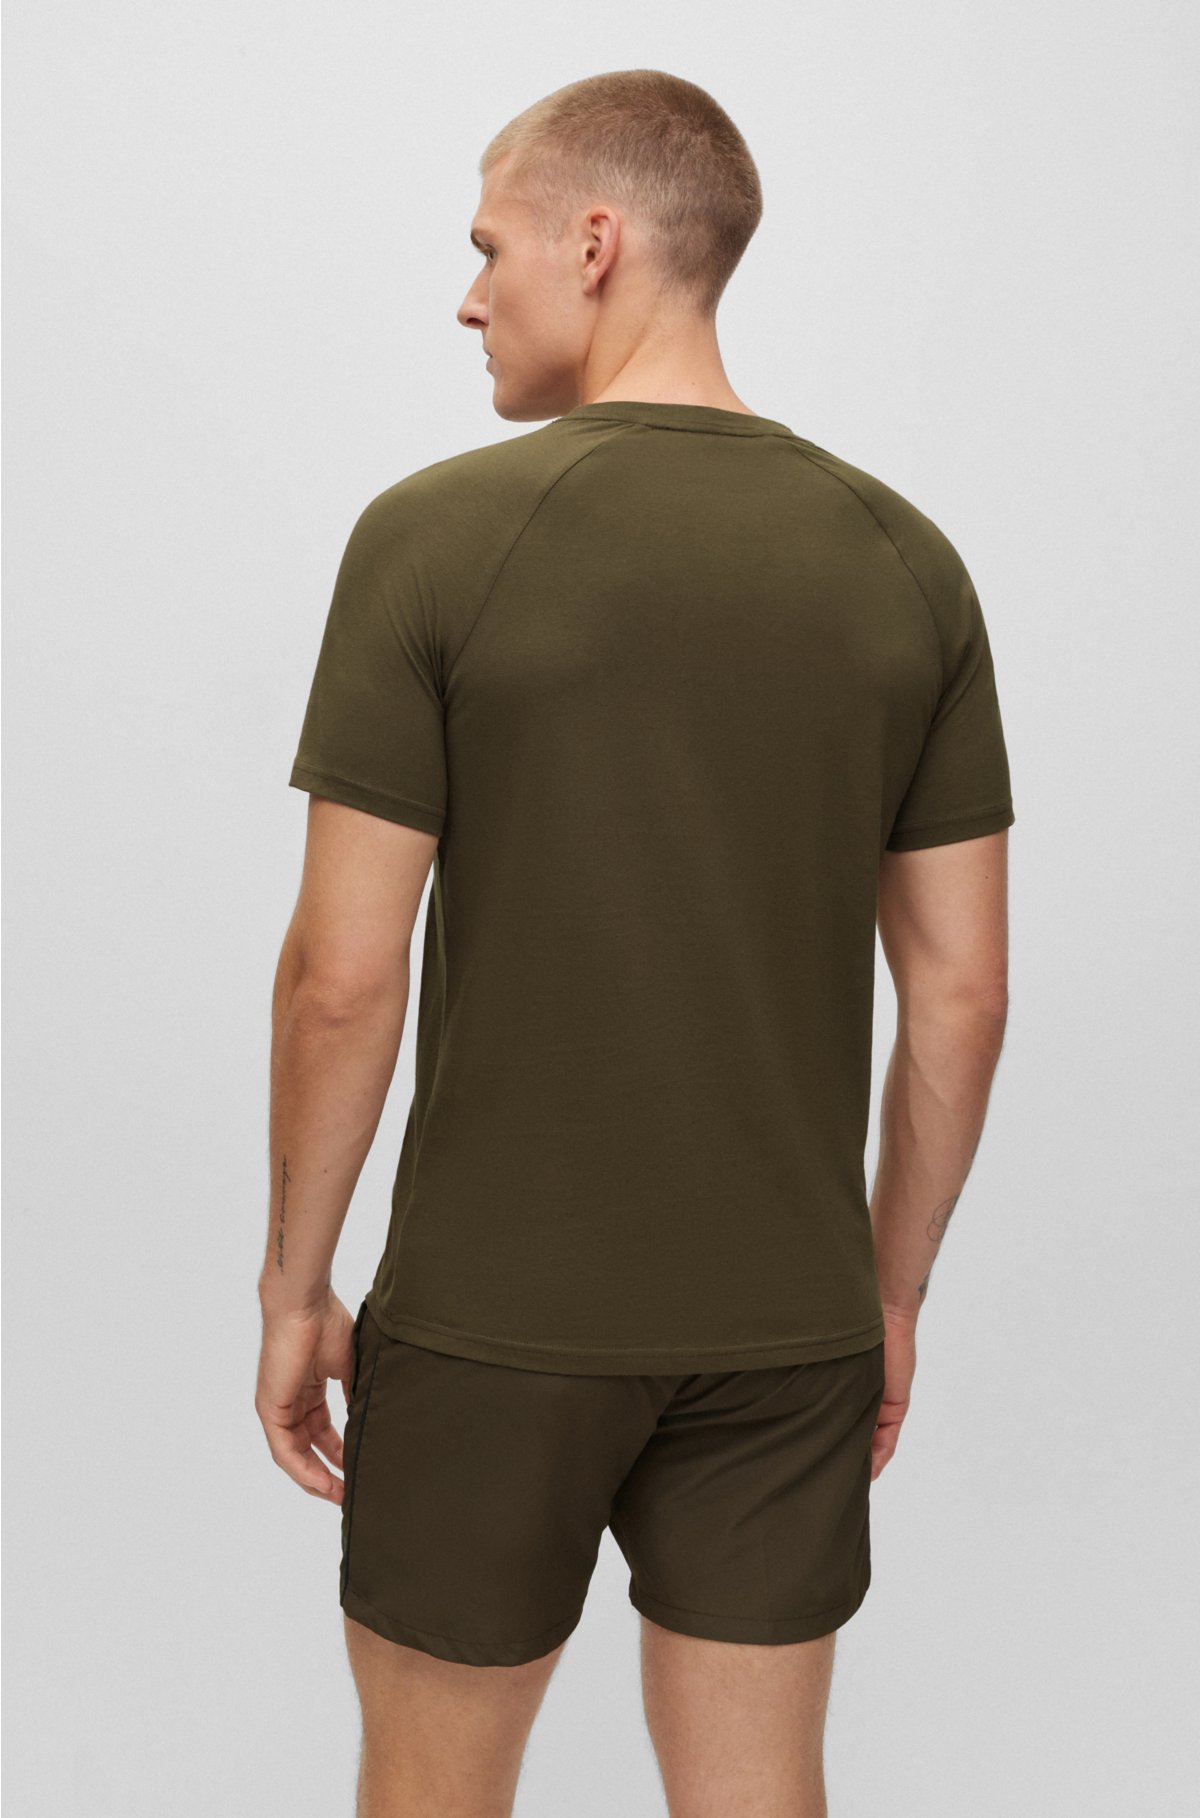 BOSS - Slim-fit T-shirt with SPF 50+ UV protection